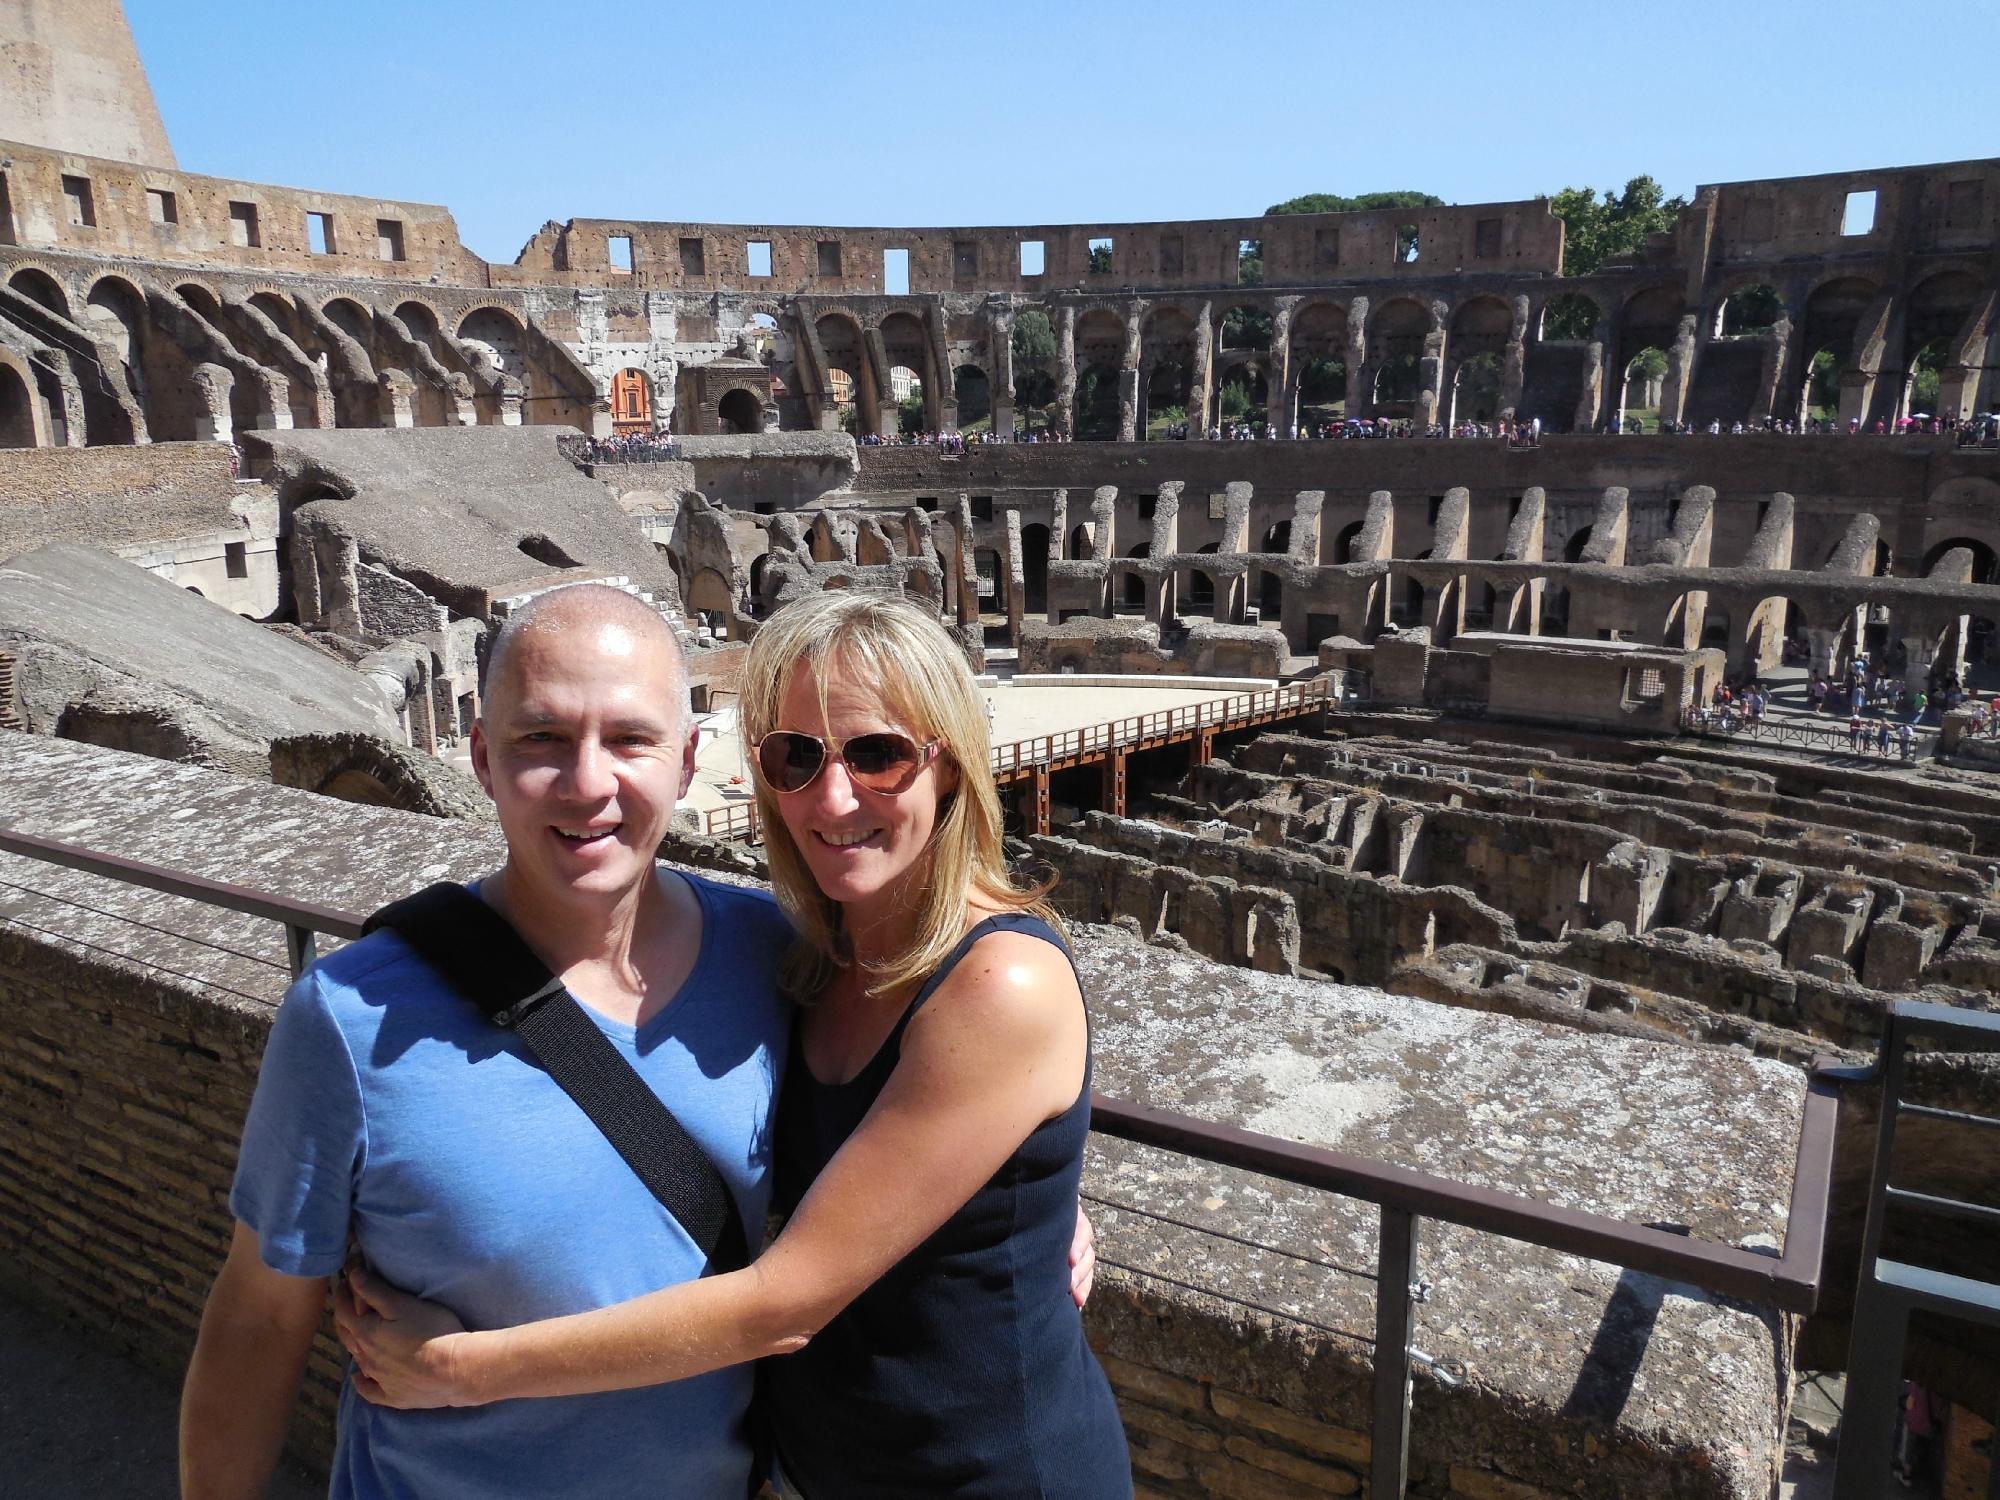 Bruno Tours - Tour Guide of Rome & Italy